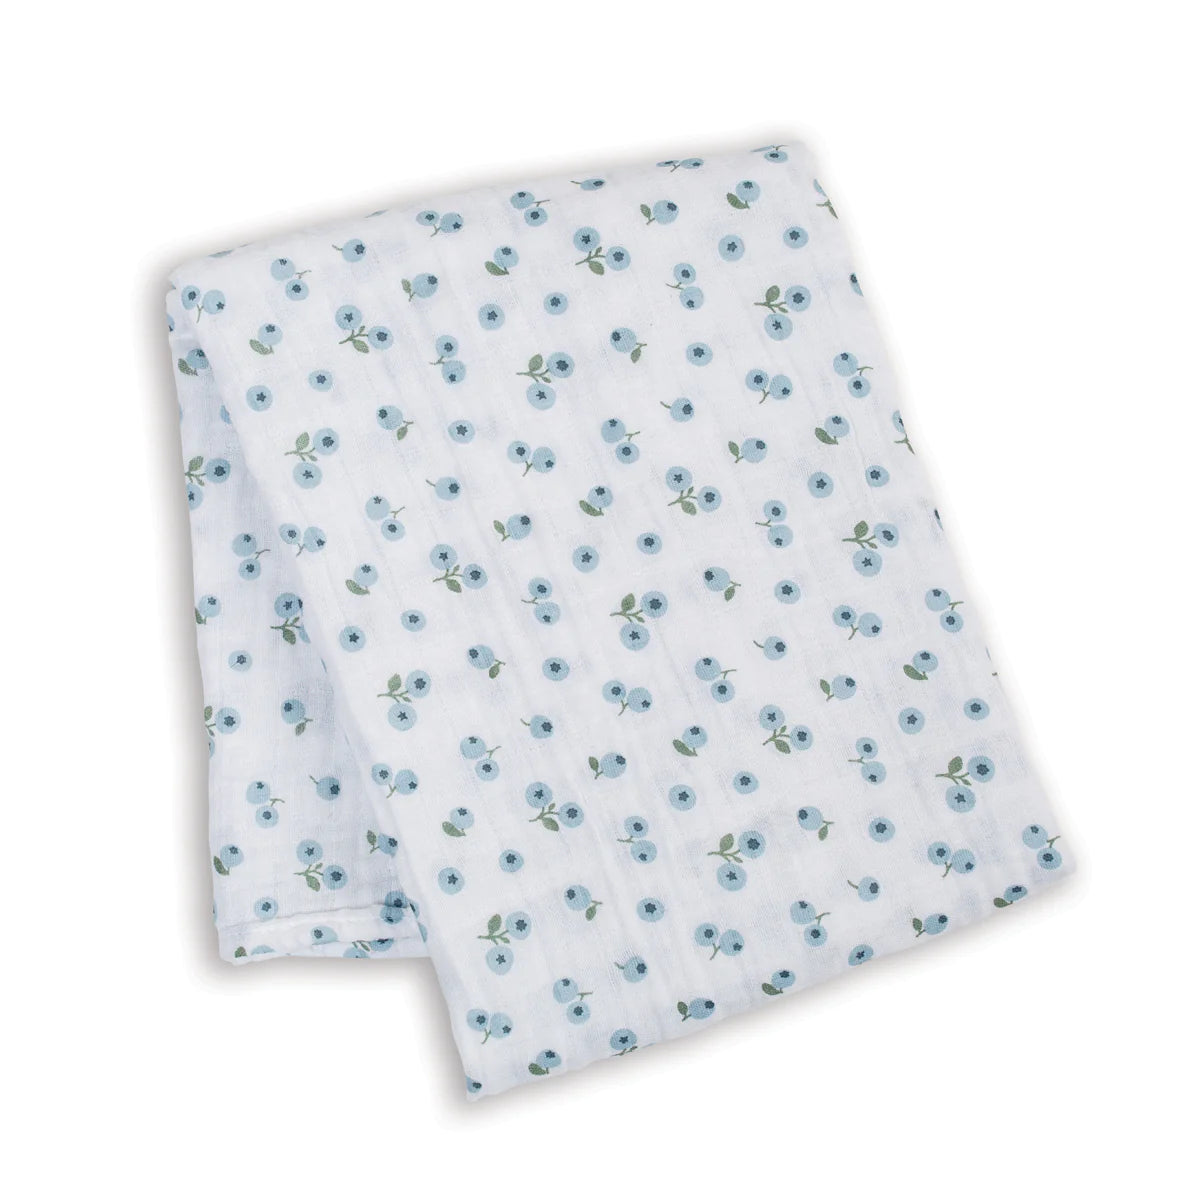 Cotton Muslin Swaddle - Blueberries